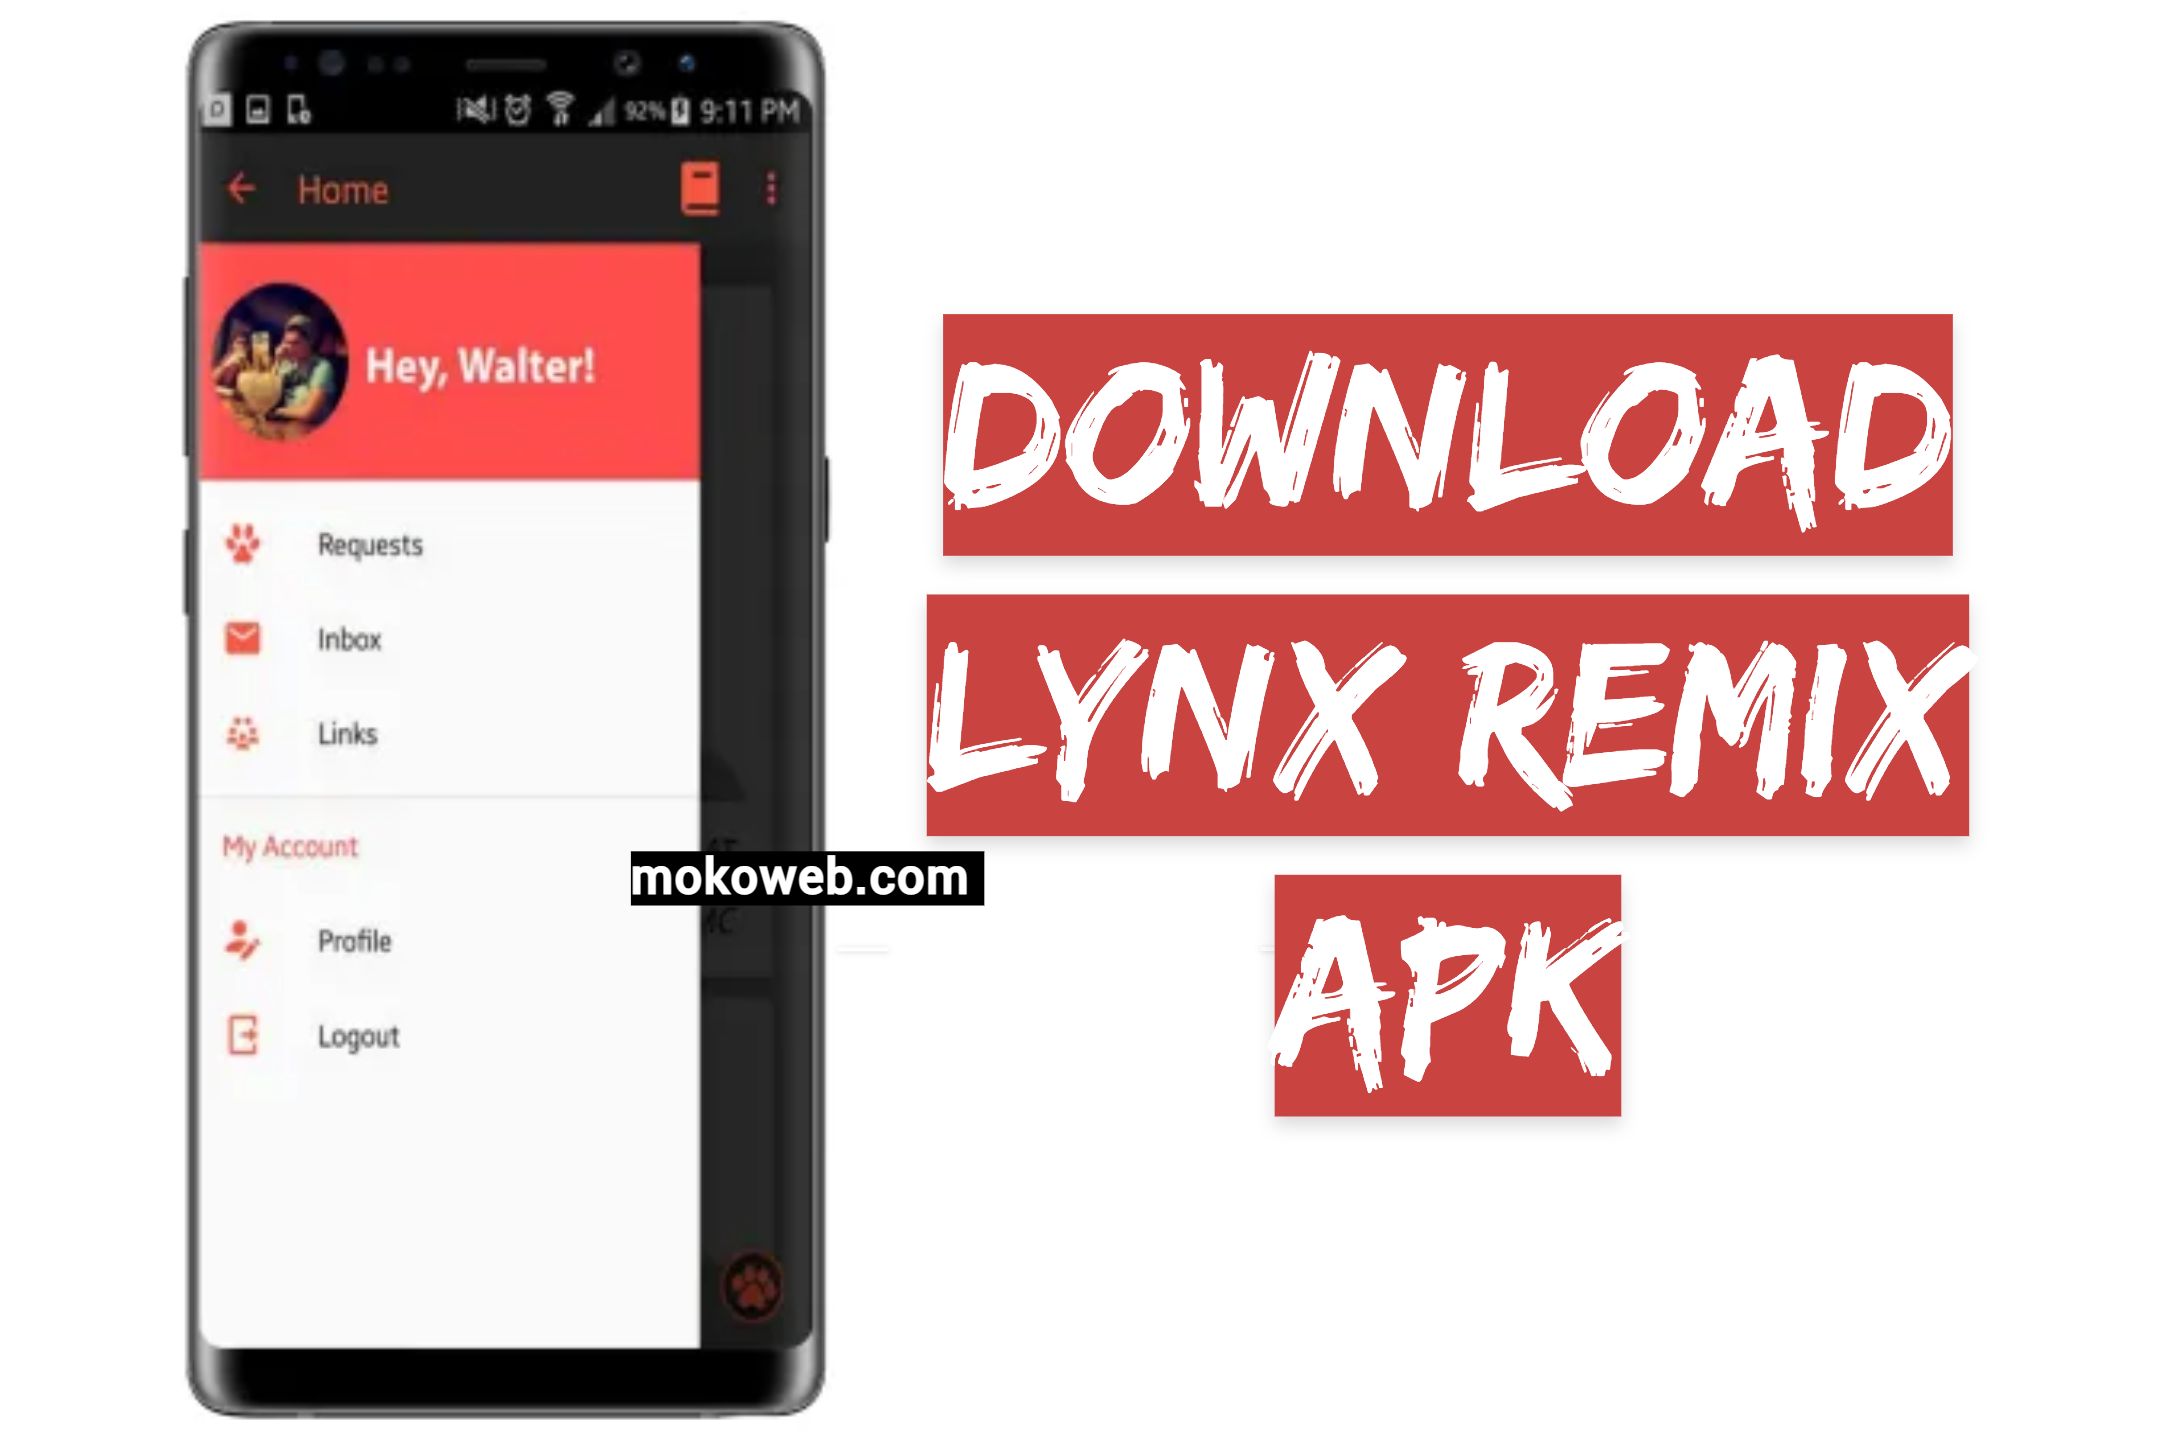 Lynx Remix APK (Android App) Free Download, 44% OFF